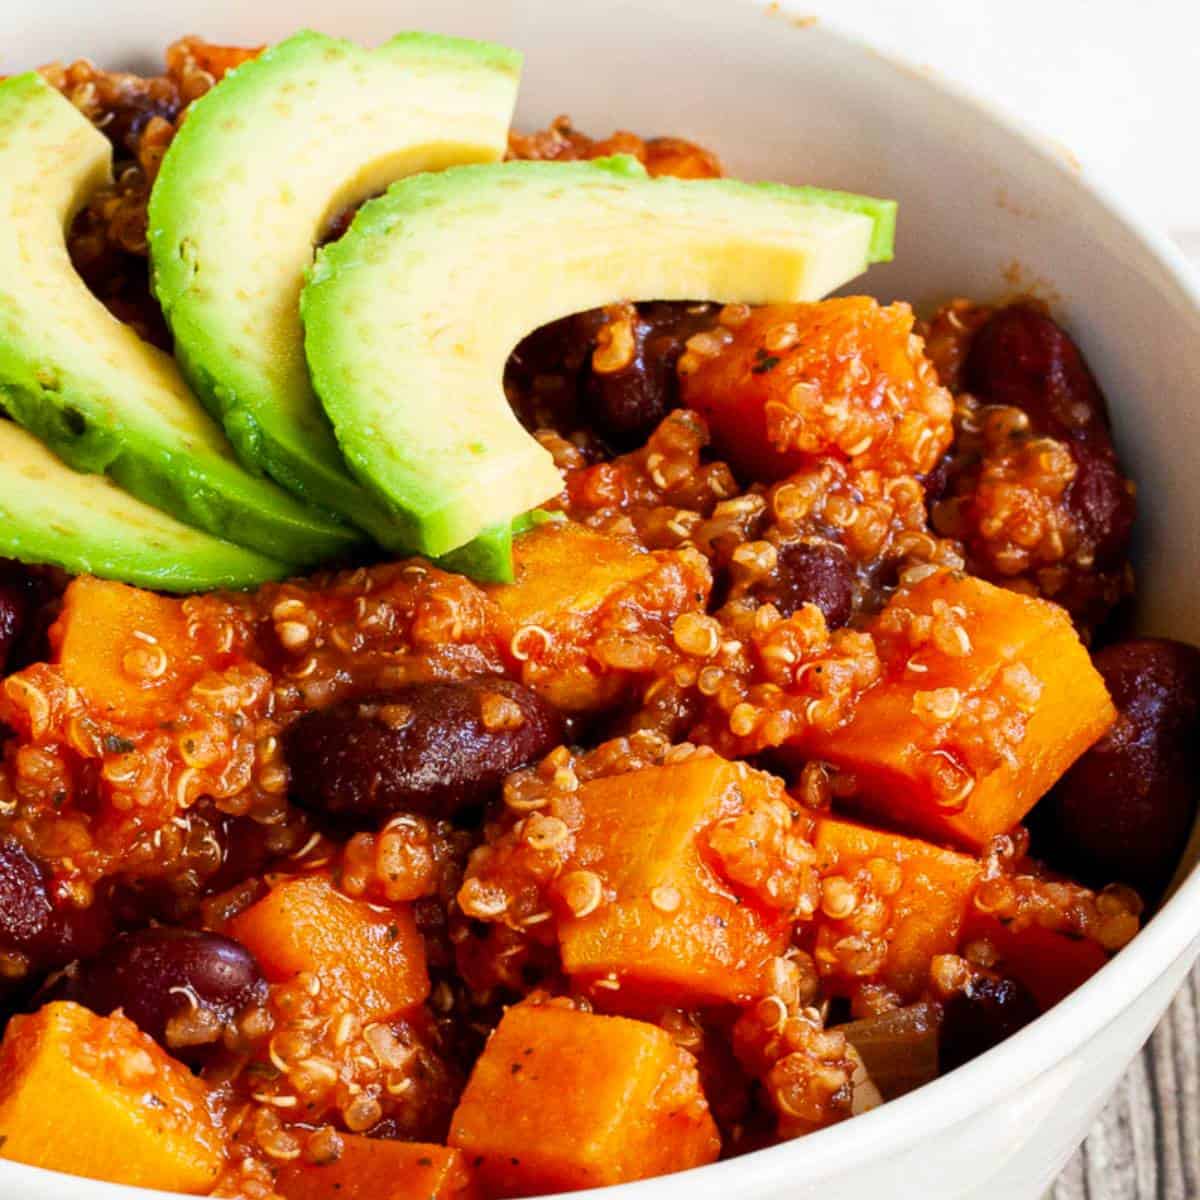 chili with sweet potatoes beans and quinoa.